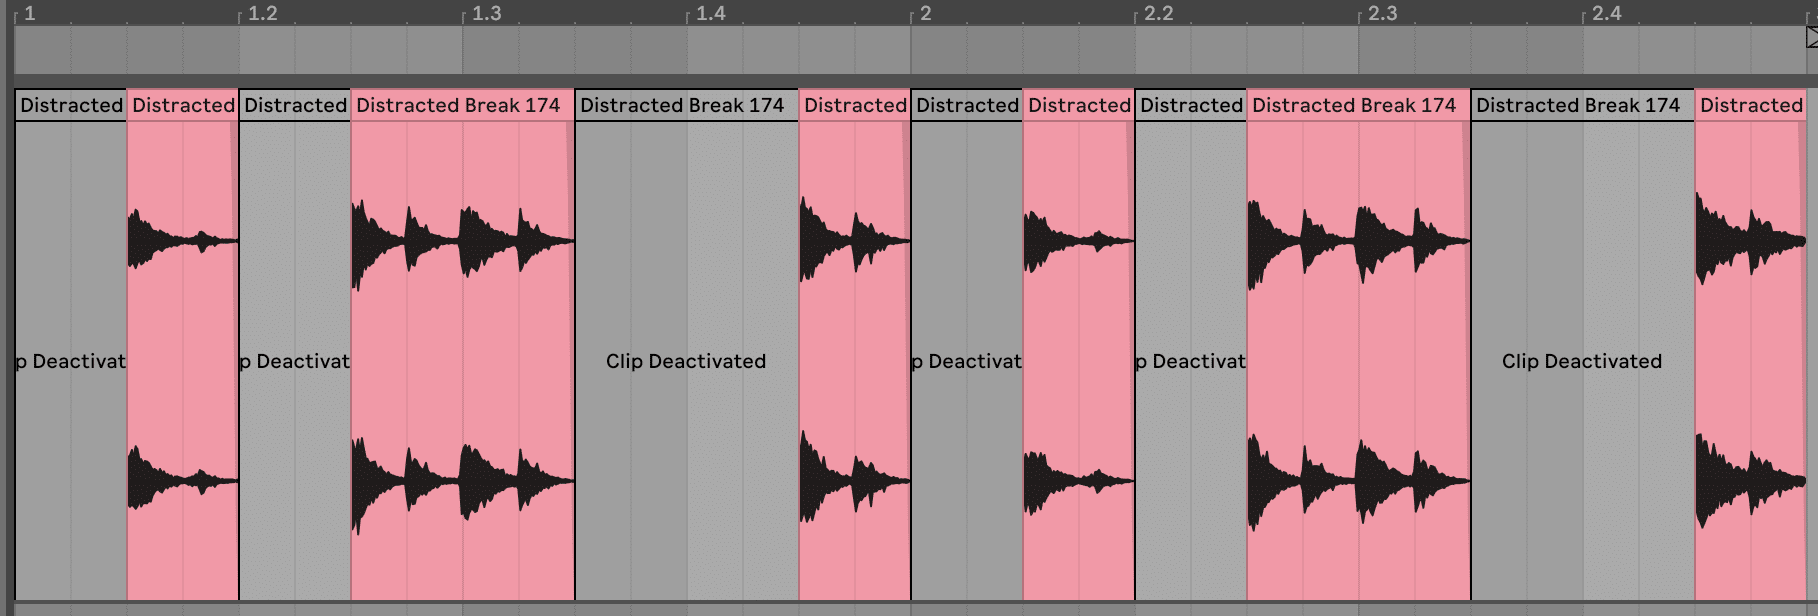 Deactivating kick and snare on DNB break